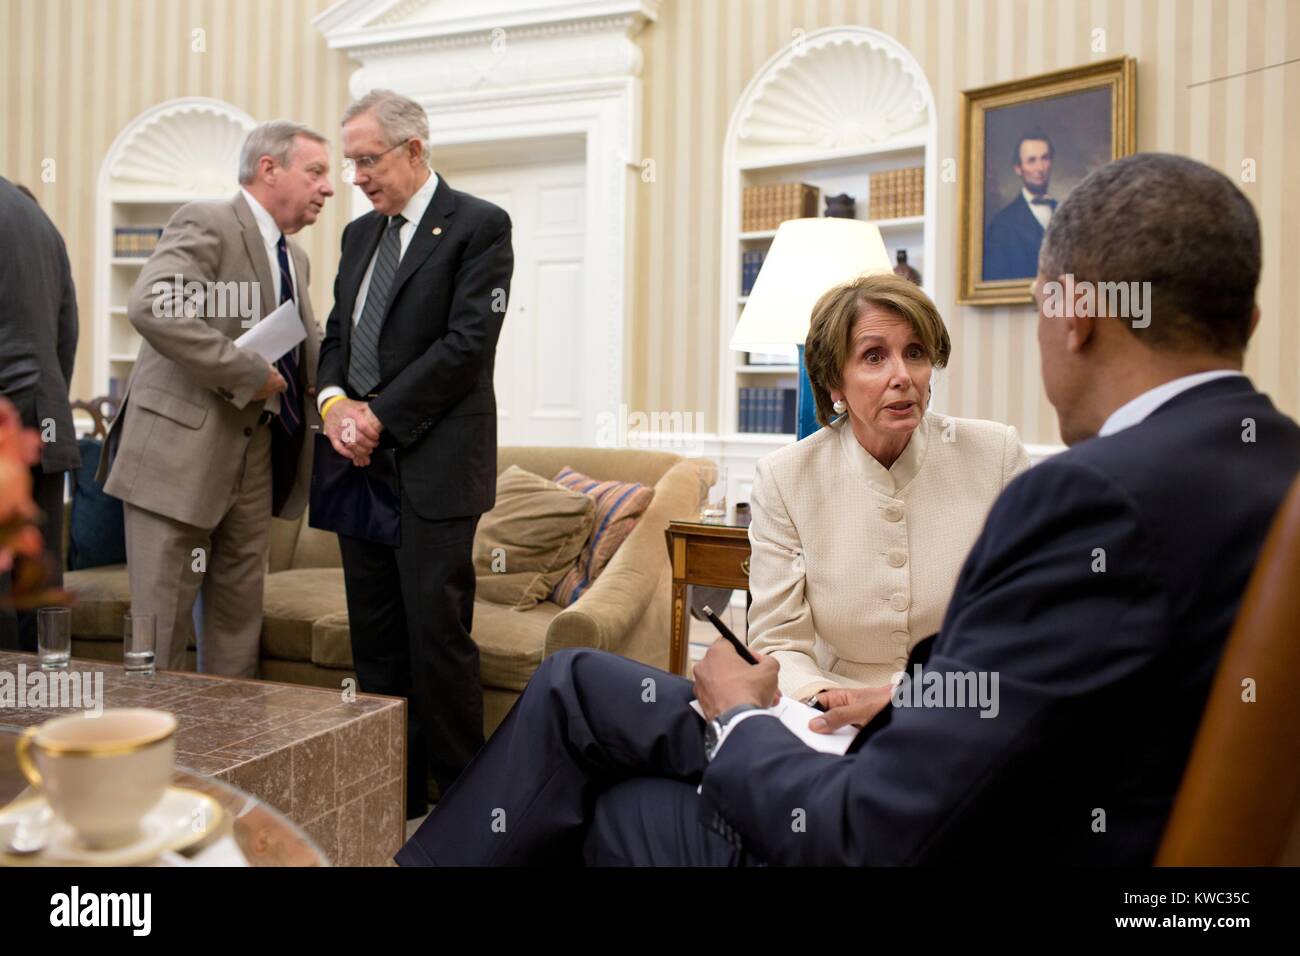 President Obama talks with House Minority Leader Nancy Pelosi, July 11, 2012. At left, Senate Majority Whip Dick Durbin talks with Senate Majority Leader Harry Reid. The group was in the Oval Office following a meeting with Democratic Leadership (BSLOC 2015 13 222) Stock Photo